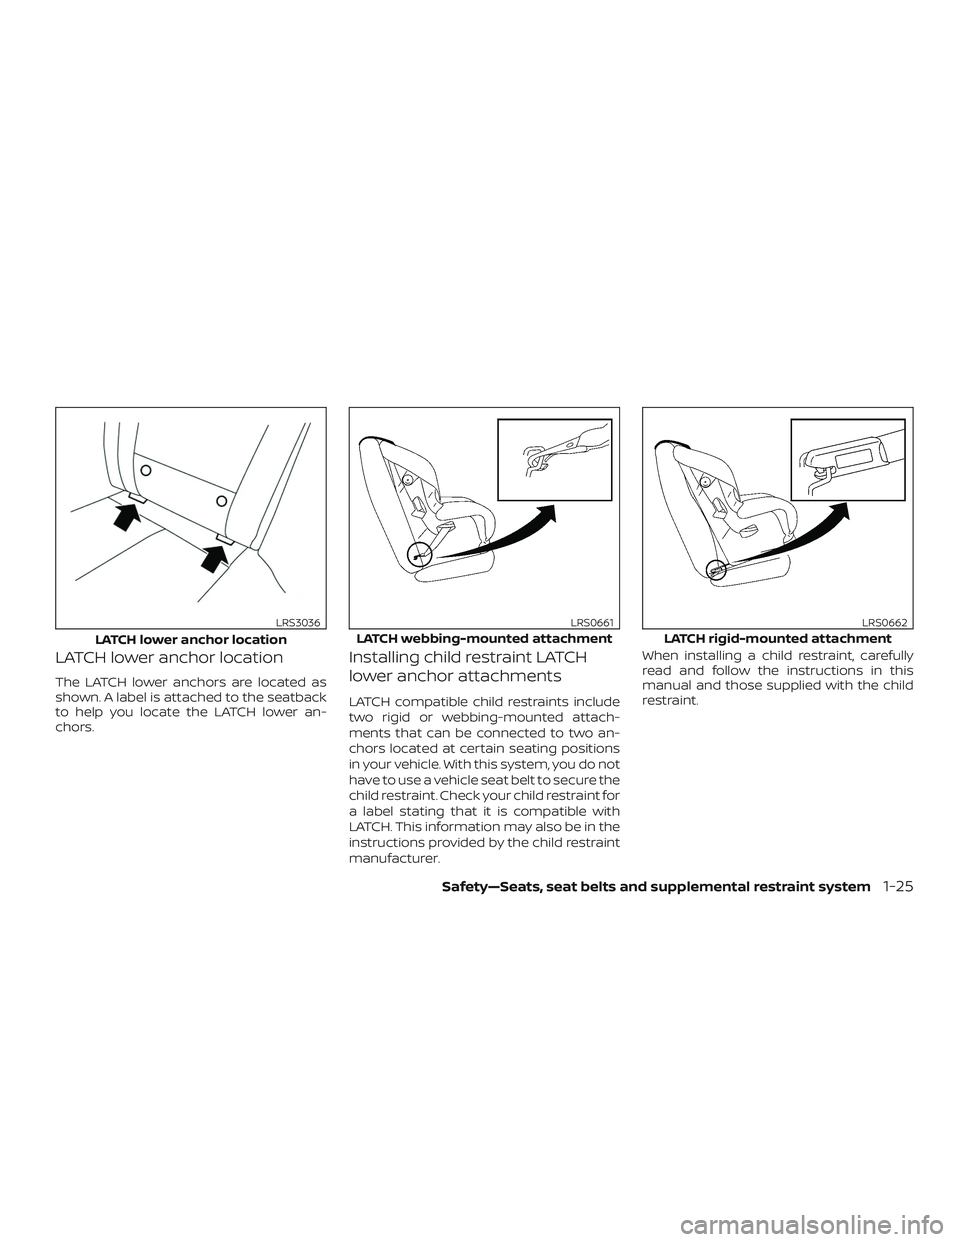 NISSAN VERSA NOTE 2020  Owner´s Manual LATCH lower anchor location
The LATCH lower anchors are located as
shown. A label is attached to the seatback
to help you locate the LATCH lower an-
chors.
Installing child restraint LATCH
lower ancho